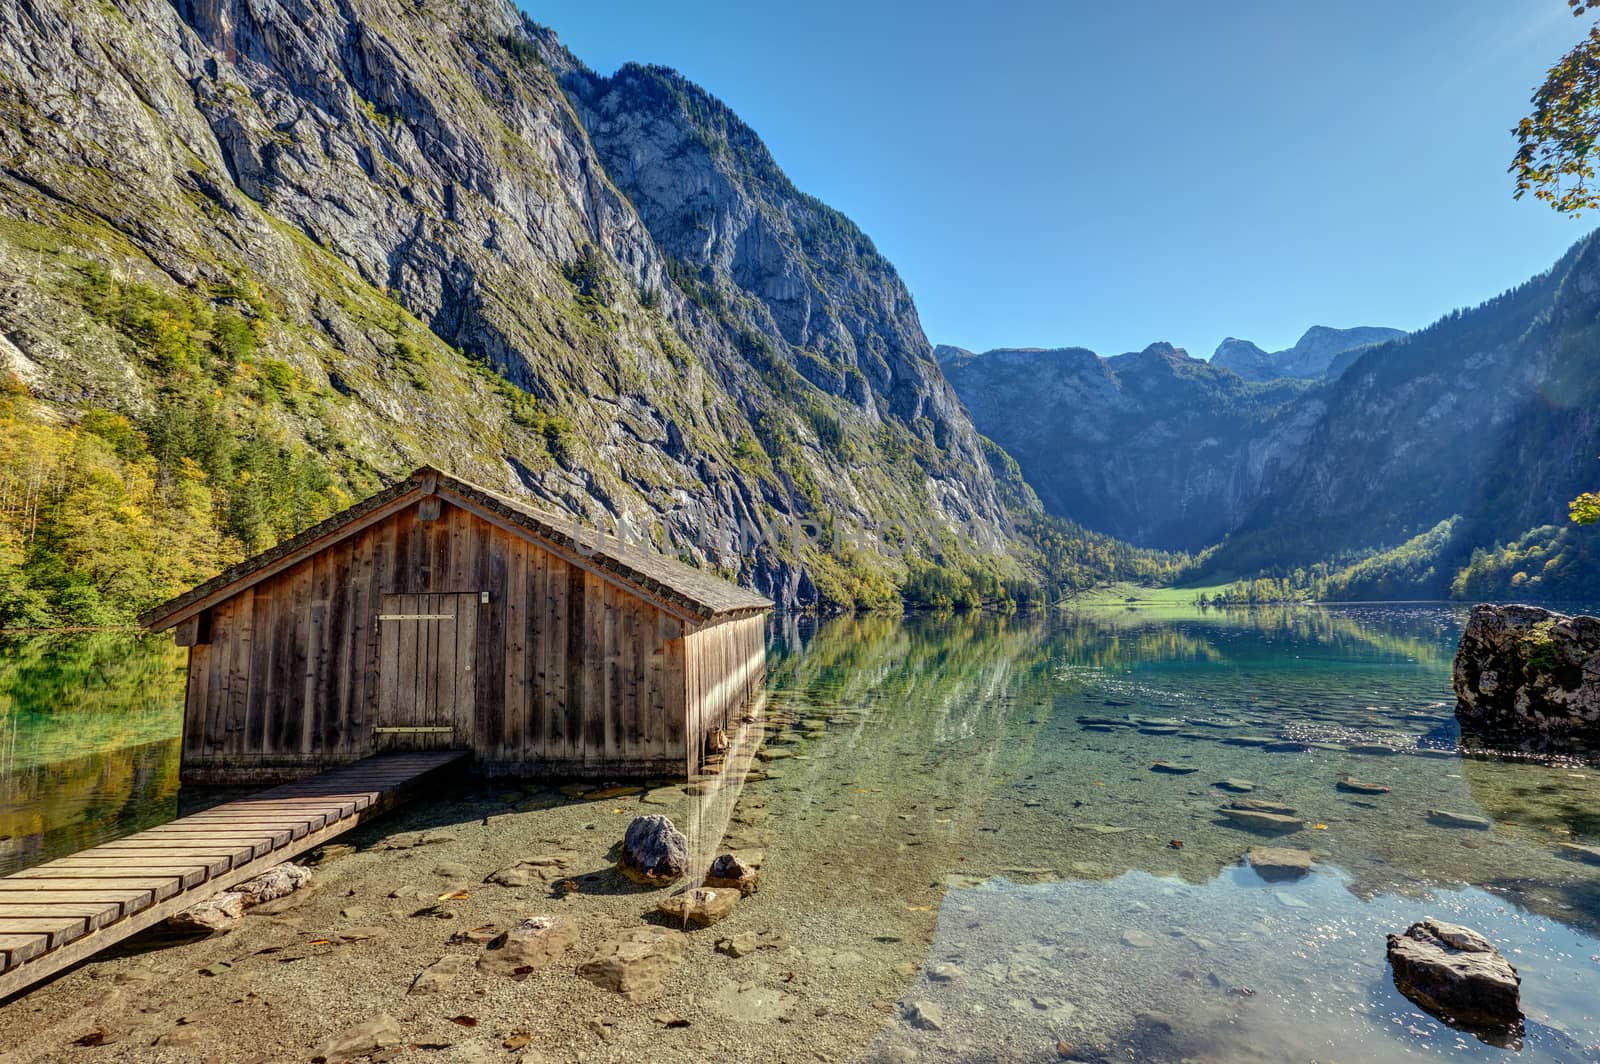 The Obersee in the Bavarian Alps by elxeneize